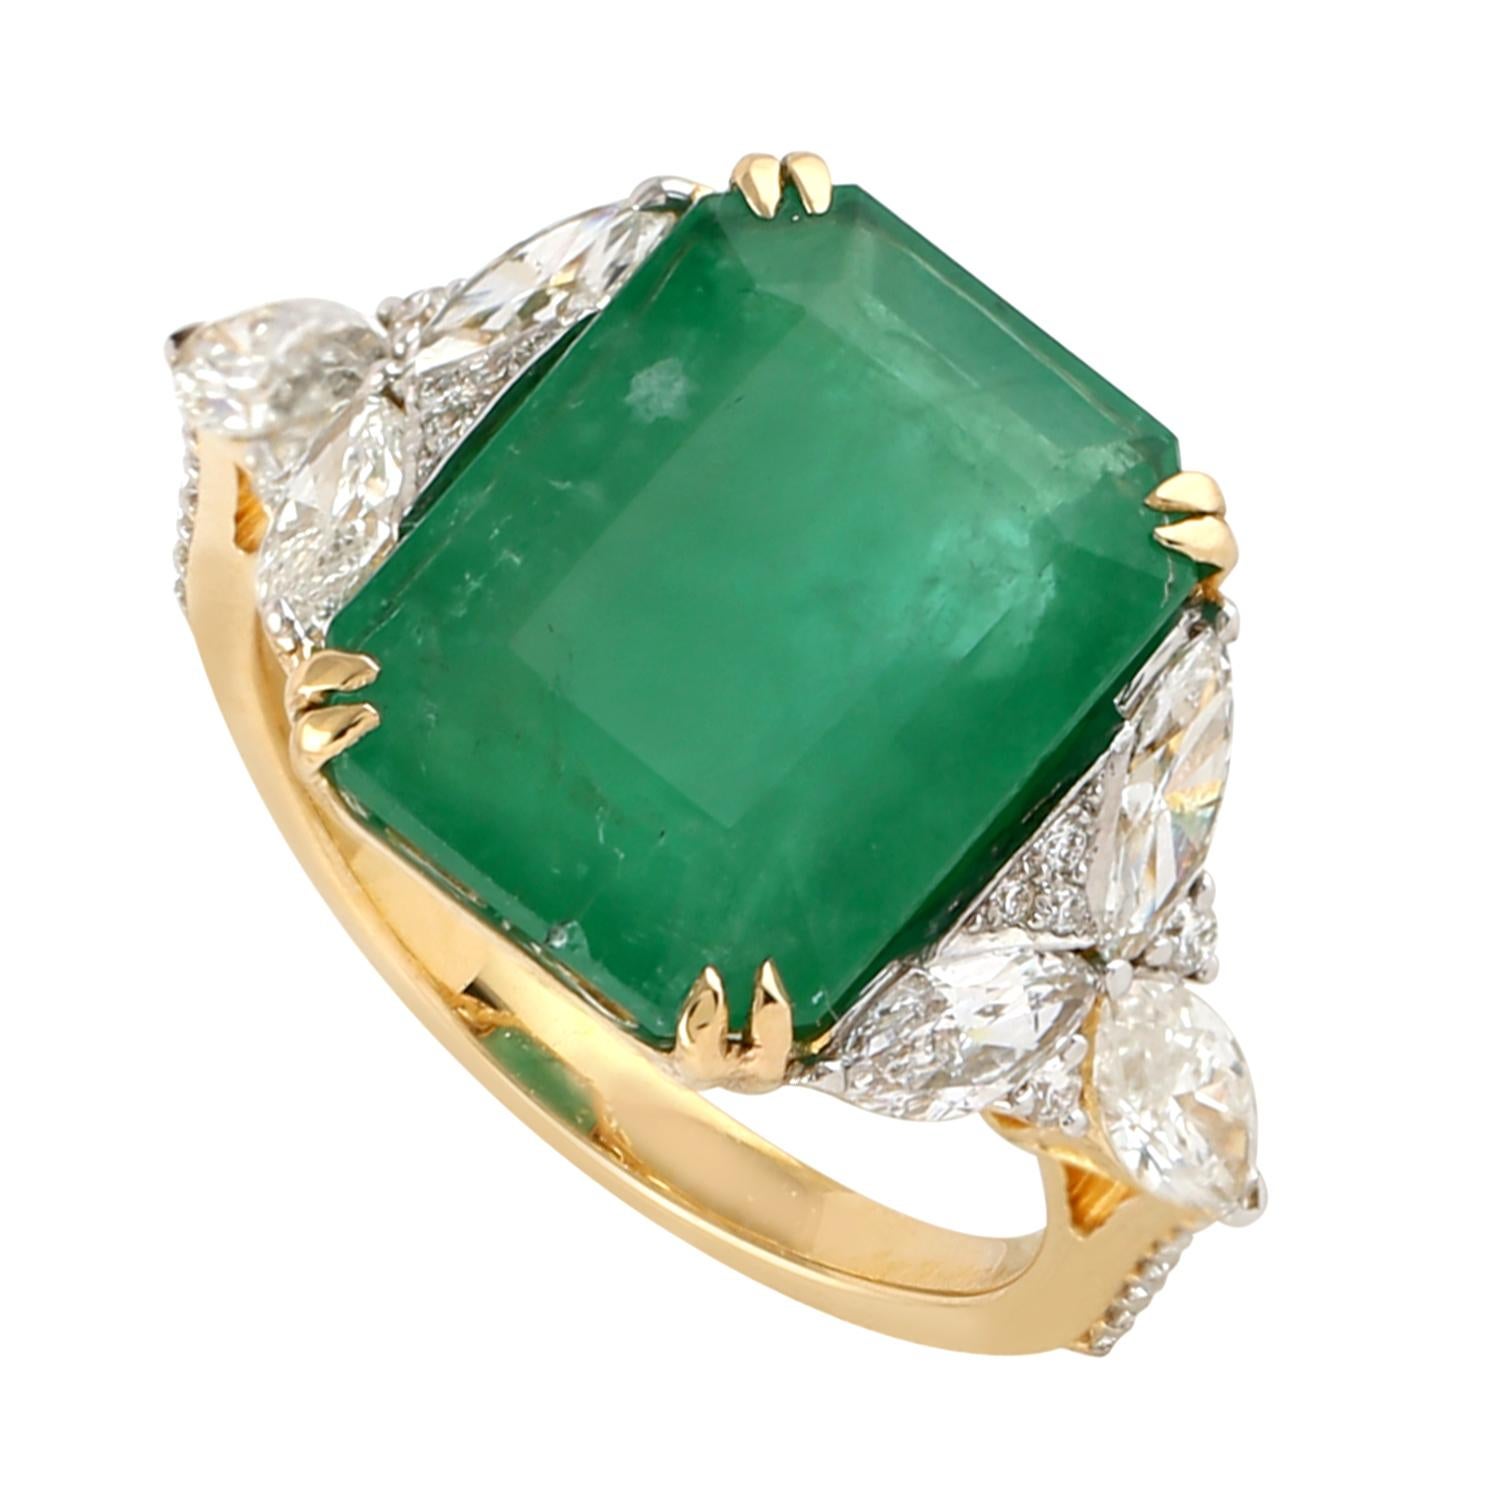 Mixed Cut Octogen Shaped Zambian Emerald Cocktail Ring With Diamonds For Sale